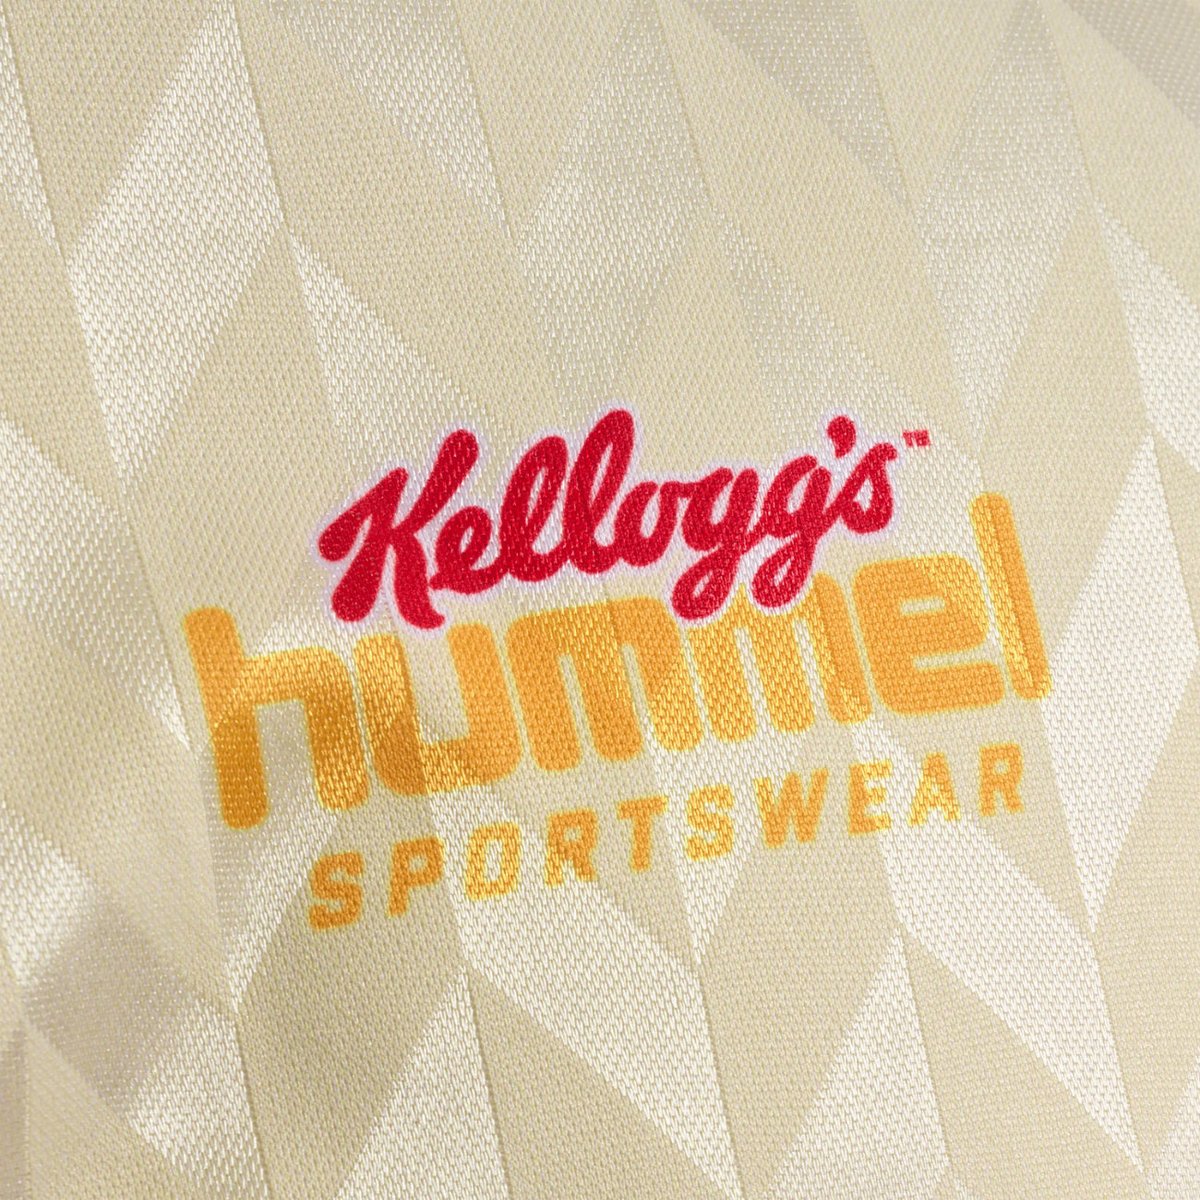 Hummel have unveiled this football-shirt-style release that is a tie-in with cereal brand Kellogg’s.

Read more: footballshirtculture.com/lifestyle/humm…

#hummel #footballshirts #soccerjersey #football